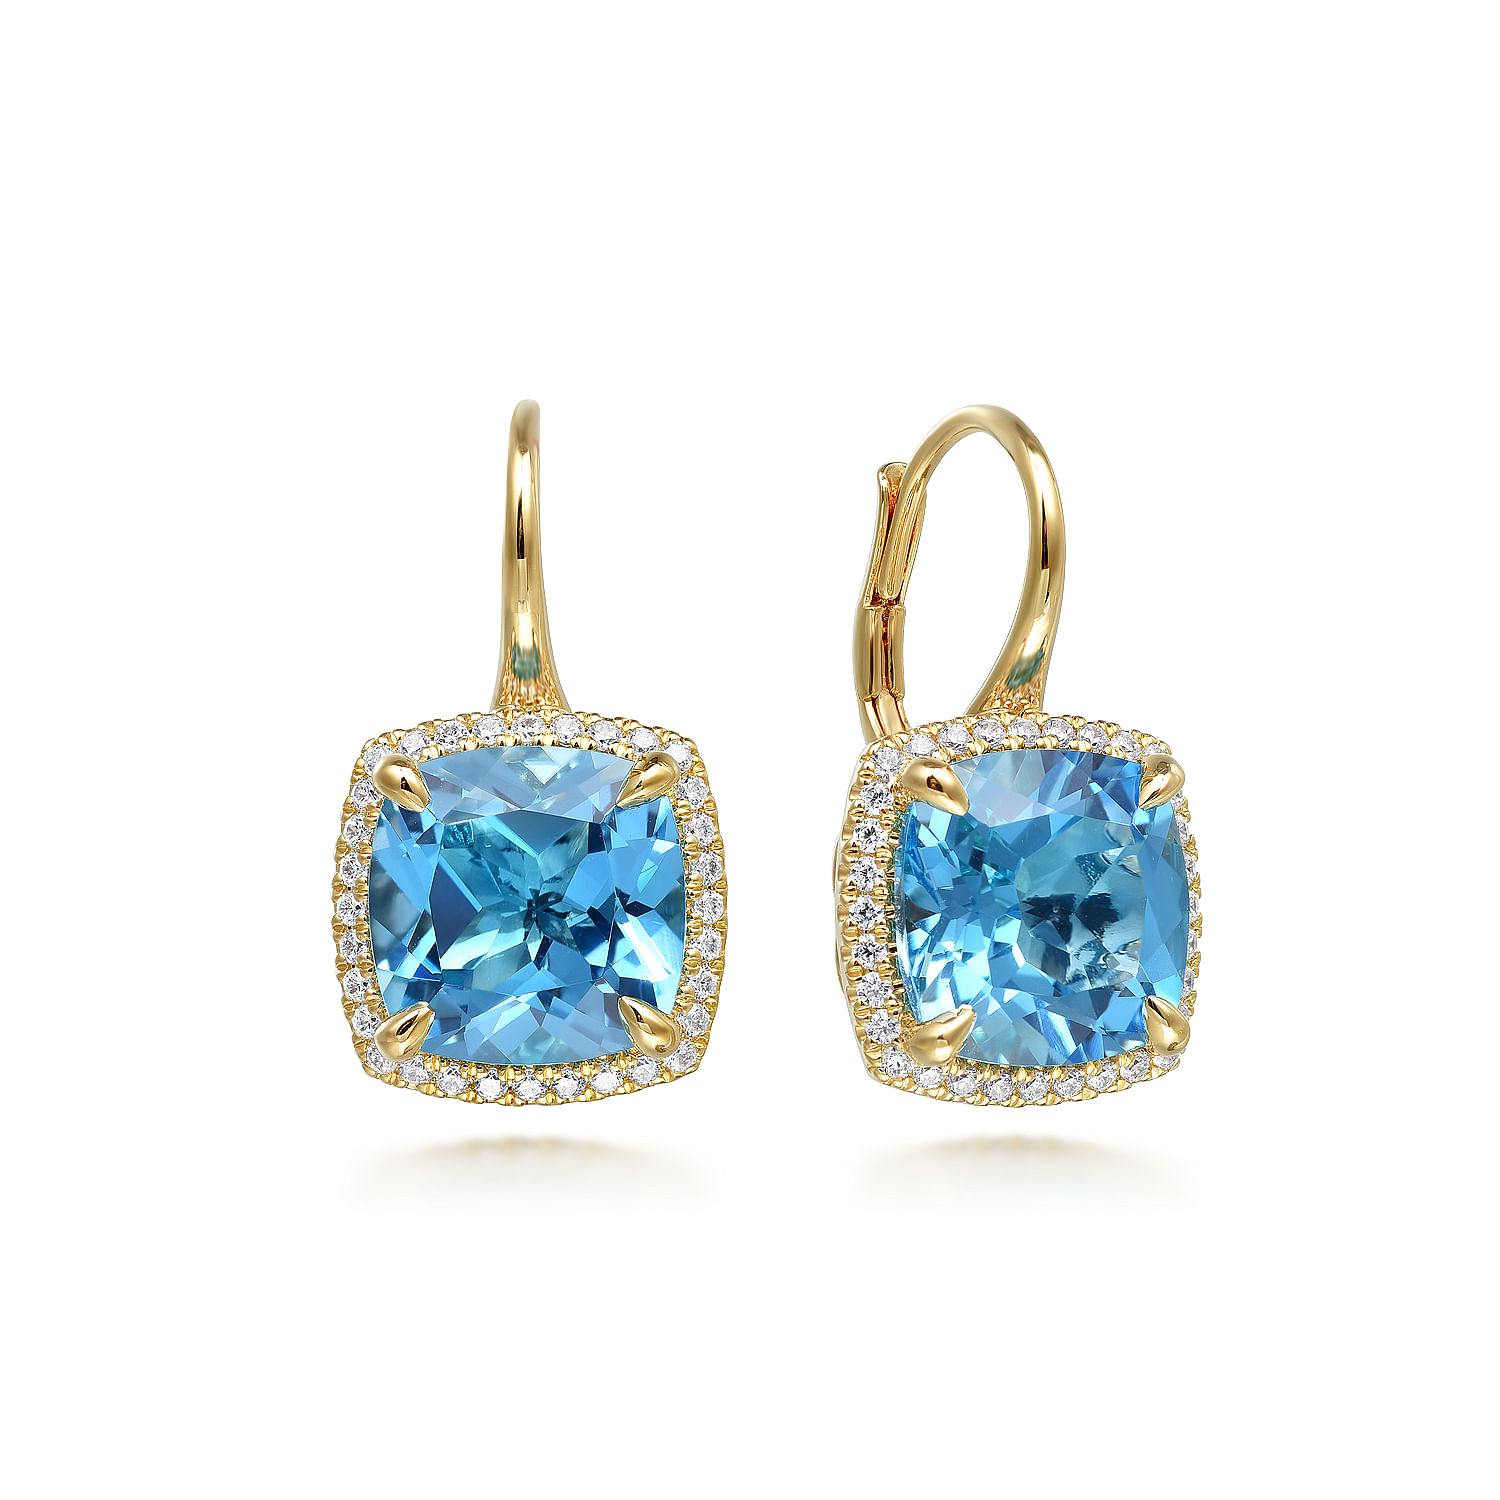 14K Yellow Gold Diamond and Blue Topaz Cushion Cut Earrings With Flower Pattern J-Back